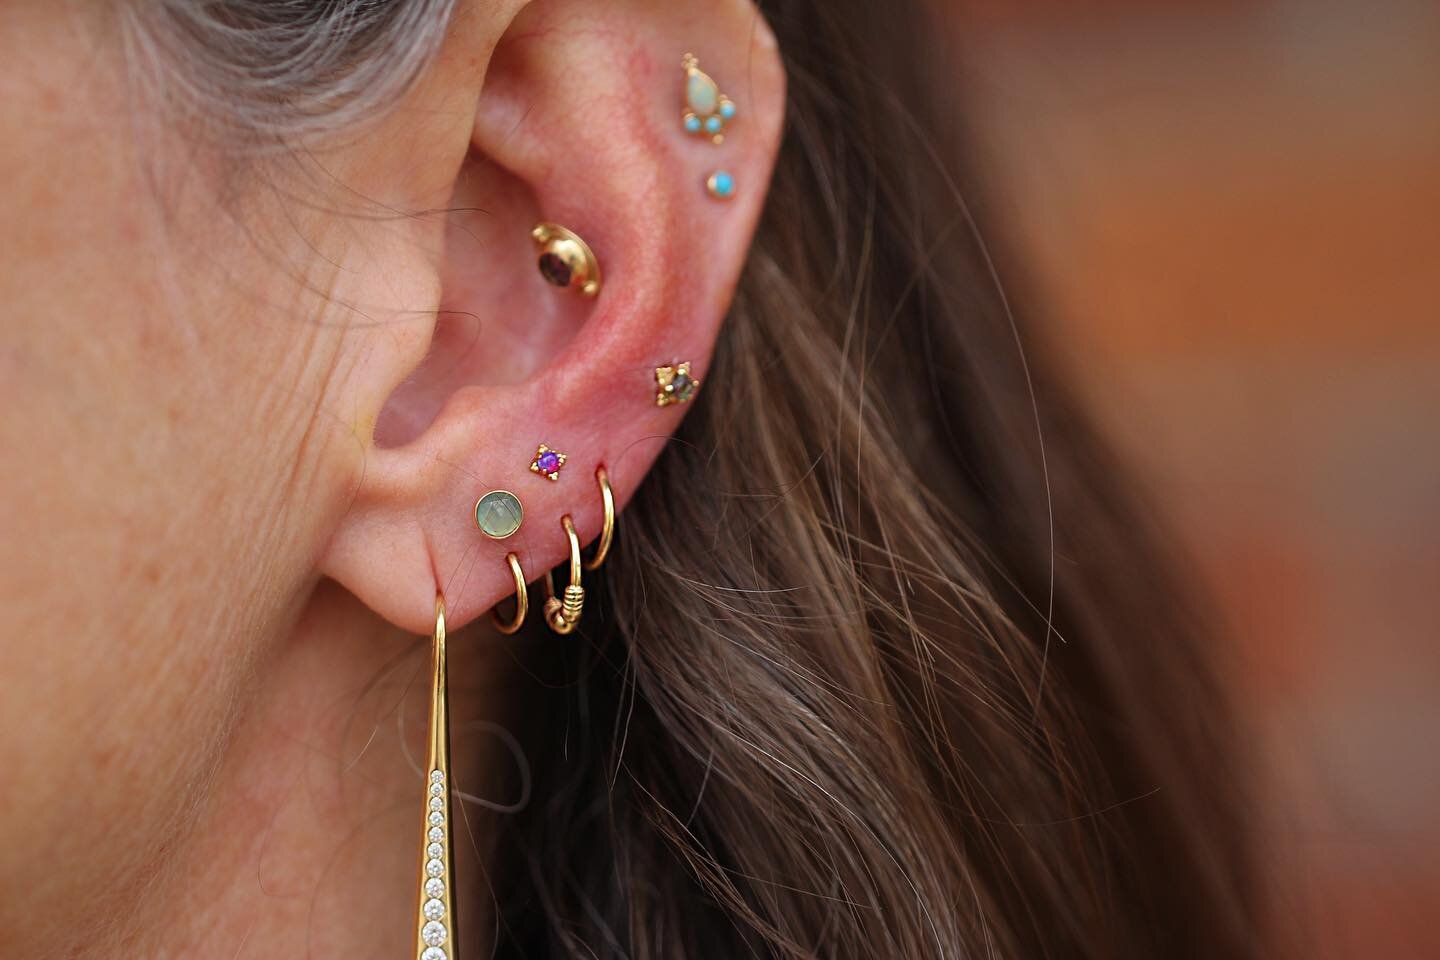 Forever obsessed with @altheasugaree style choice for her ears!  We added an adorable new stack with a Zia in purple opal from @anatometalinc plus more on her other ear!!! Swapped her beautiful chalcedony piece from @bvla to her existing stack as wel